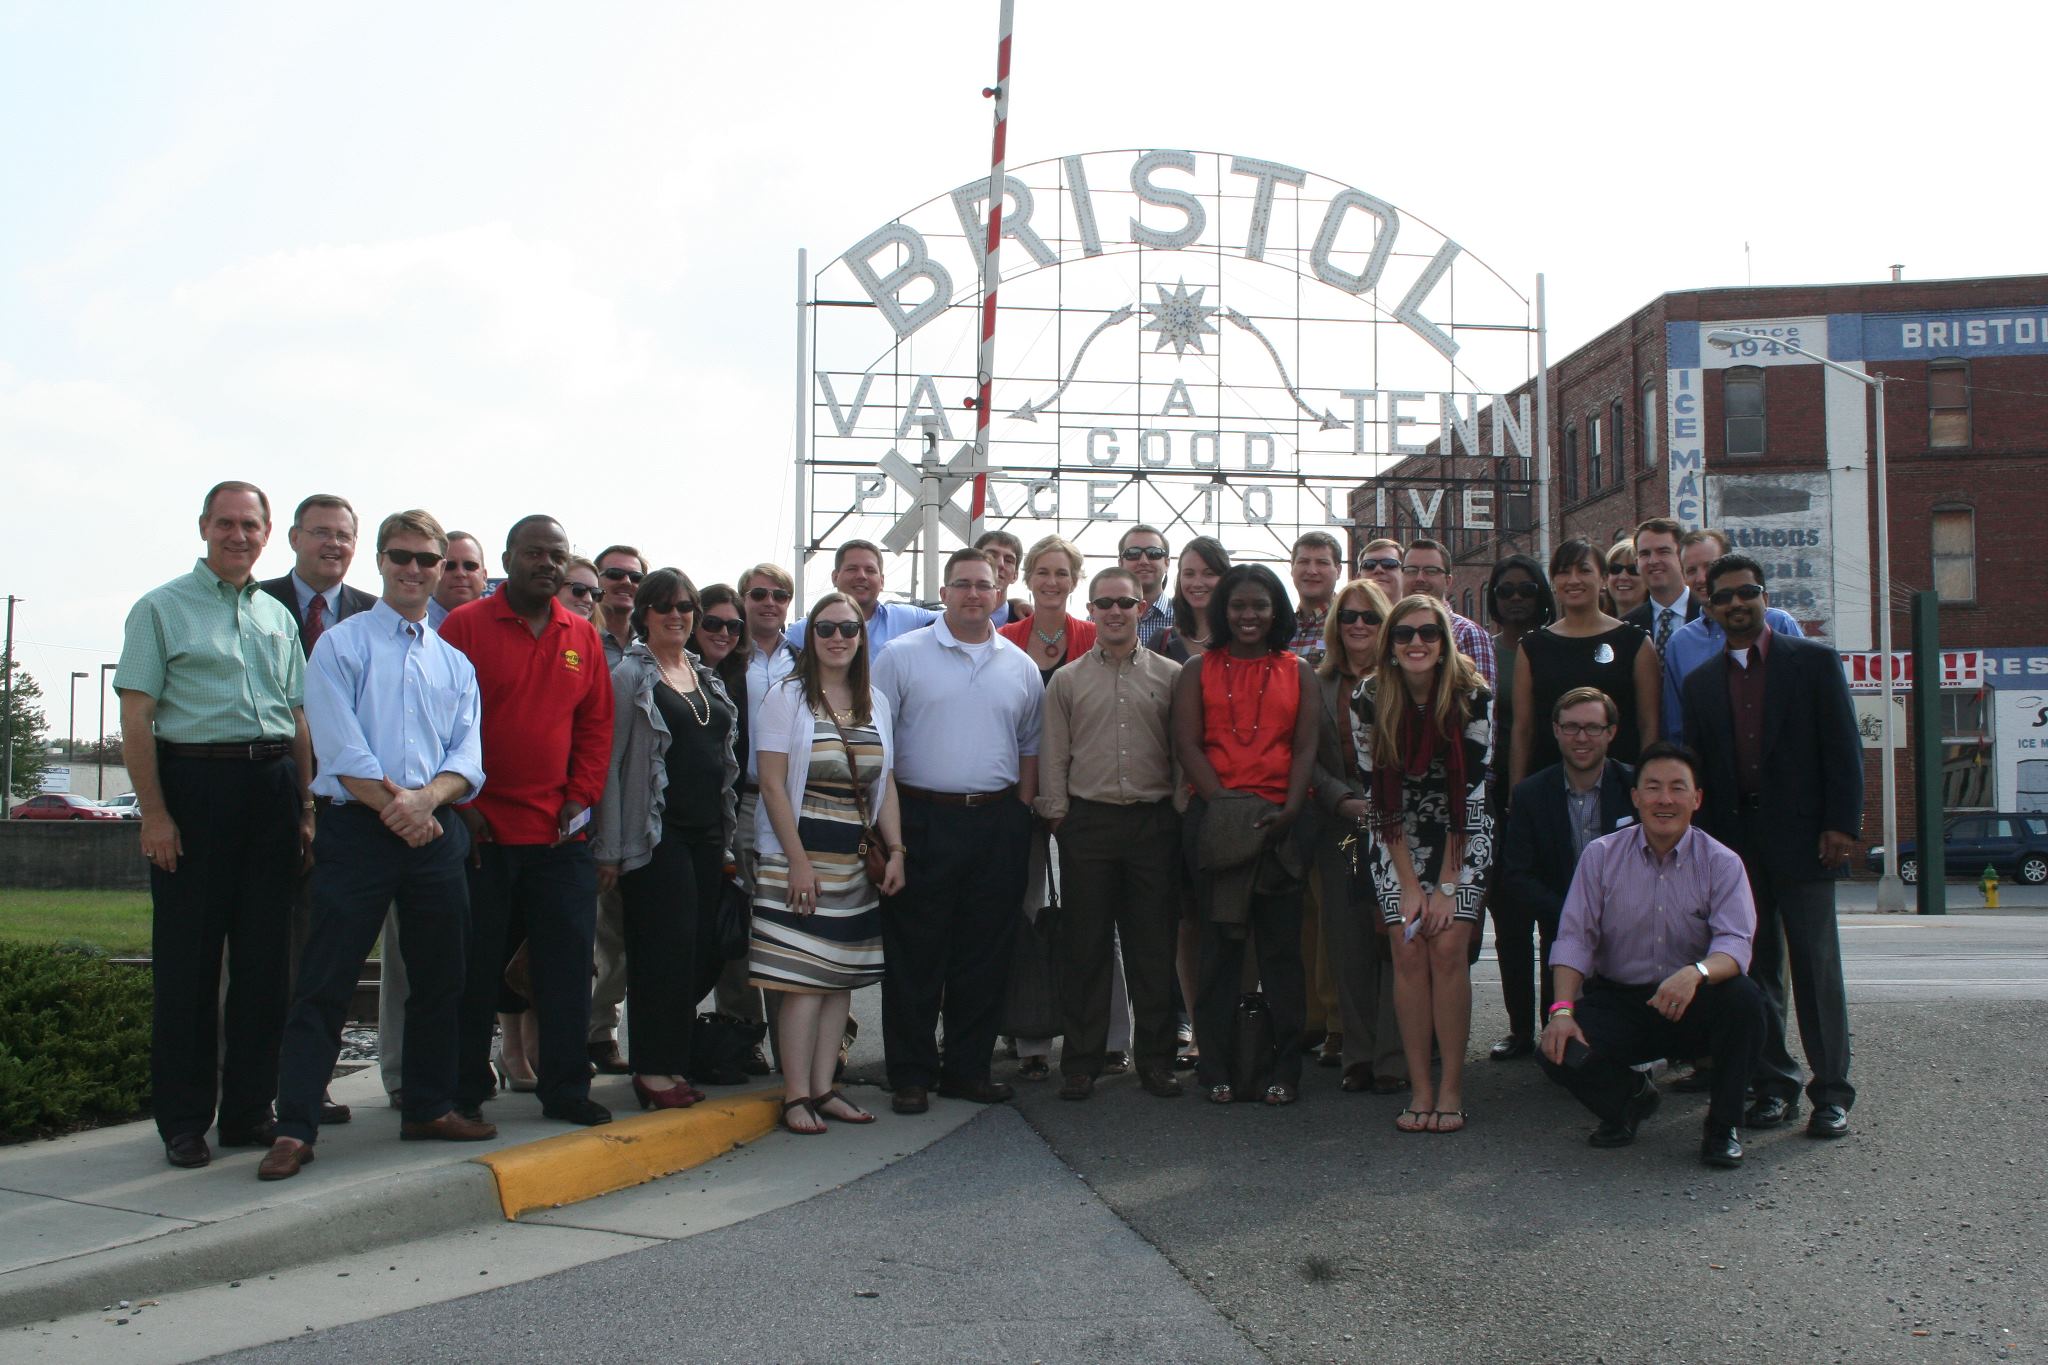 Group photo in Bristol Virginia and Tennessee